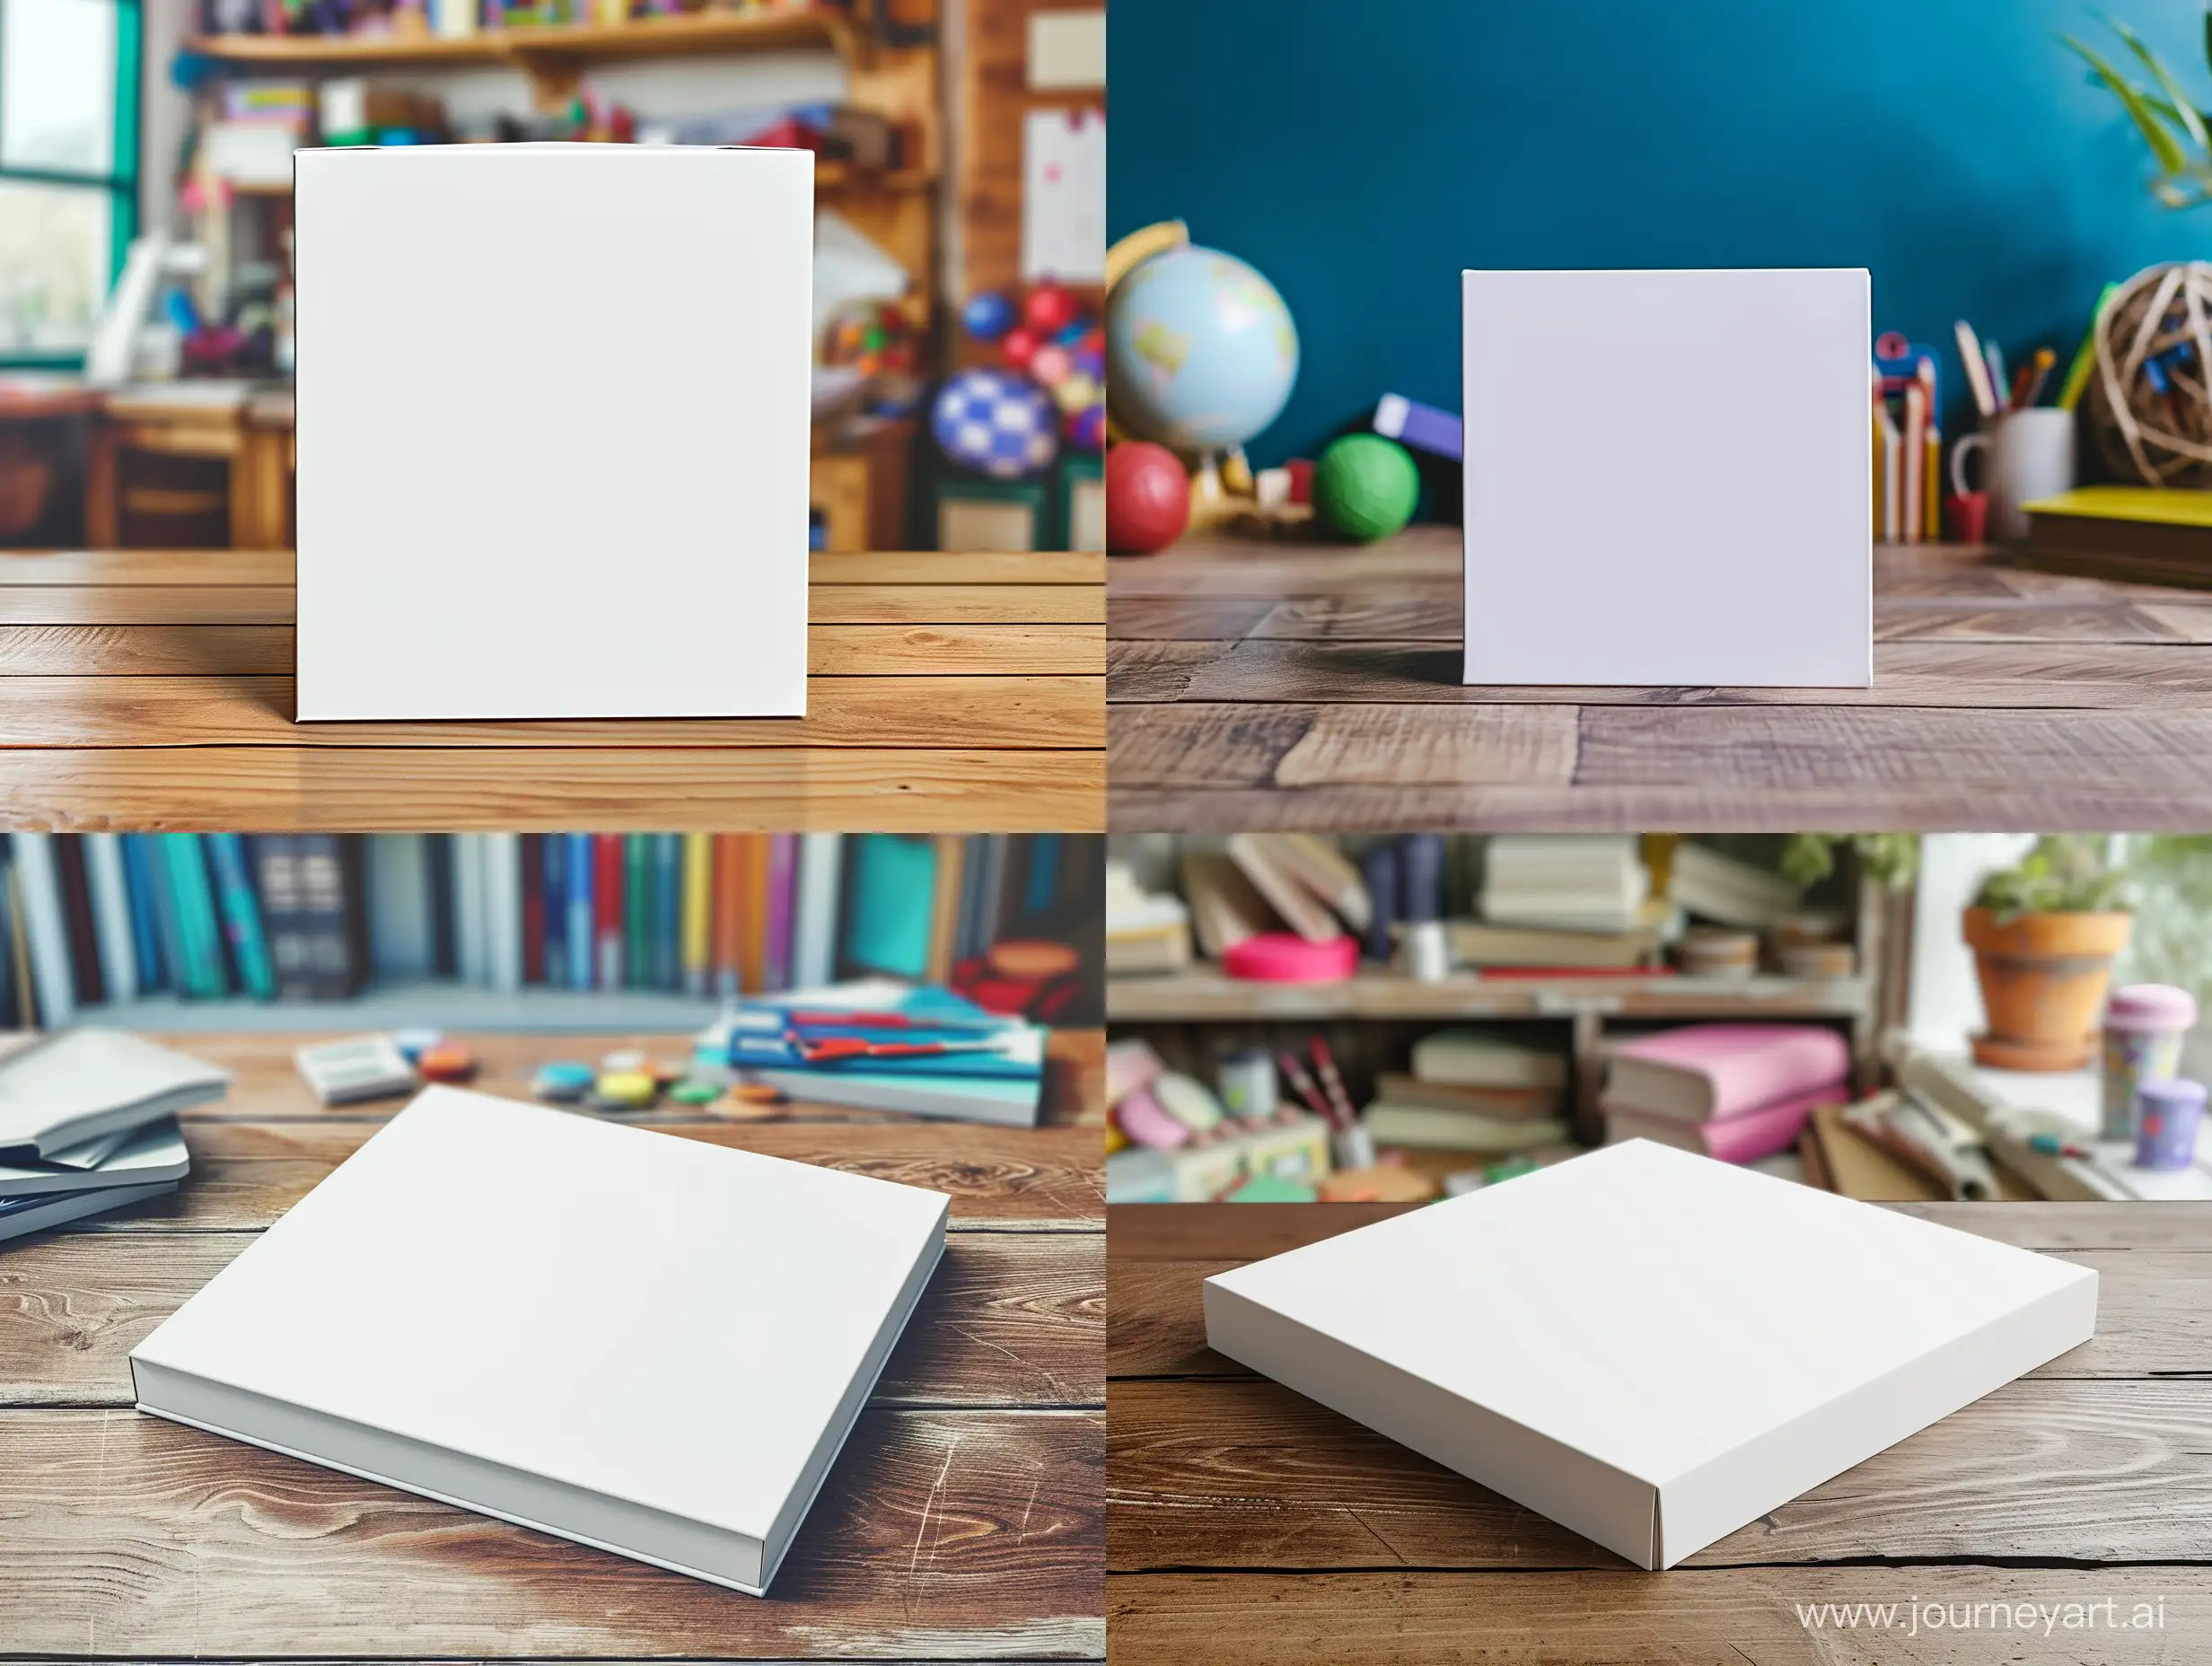 A mockup design of white board game box, school items background, wood table